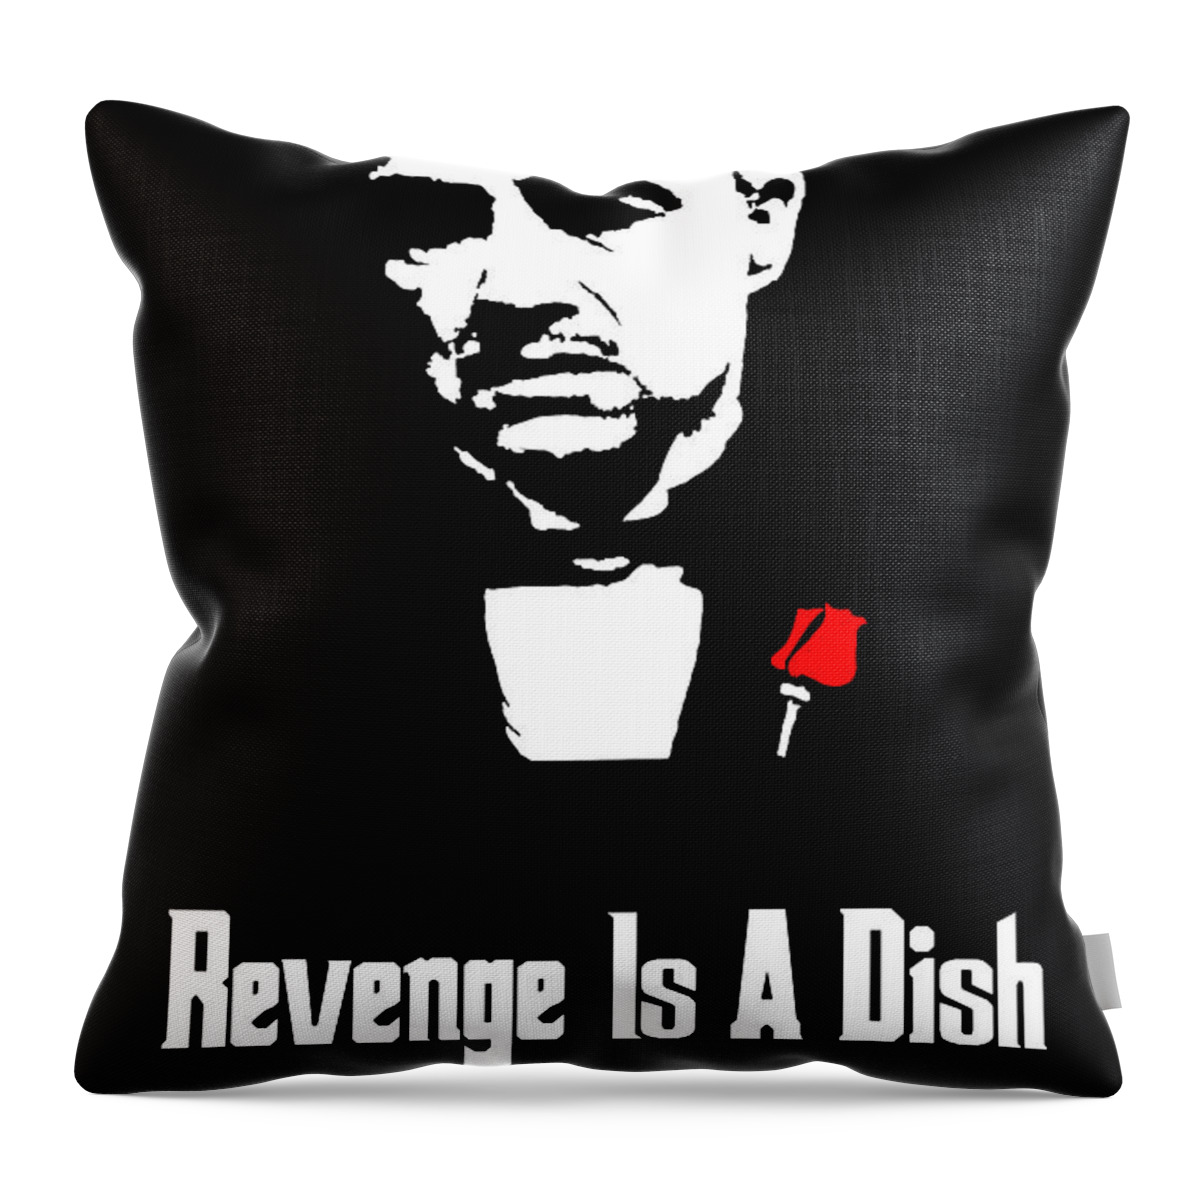 Vito Corleone Throw Pillow featuring the painting Revenge Is A Dish Best Served Cold - The Godfather Poster by Beautify My Walls